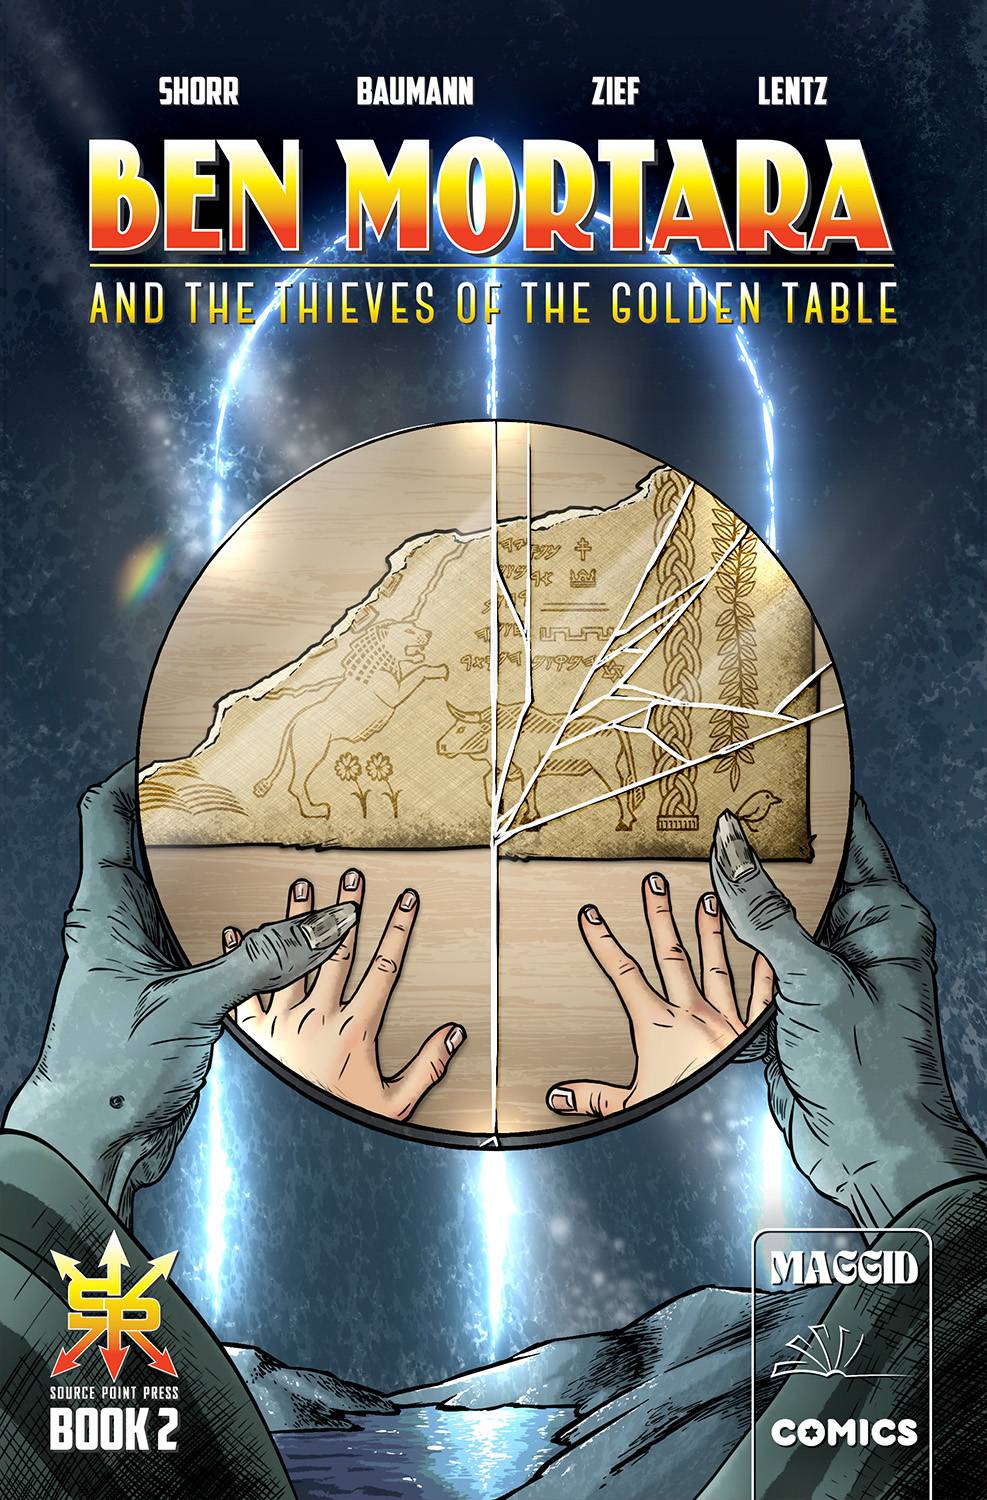 BEN MORTARA AND THIEVES OF GOLDEN TABLE #2 (OF 4)